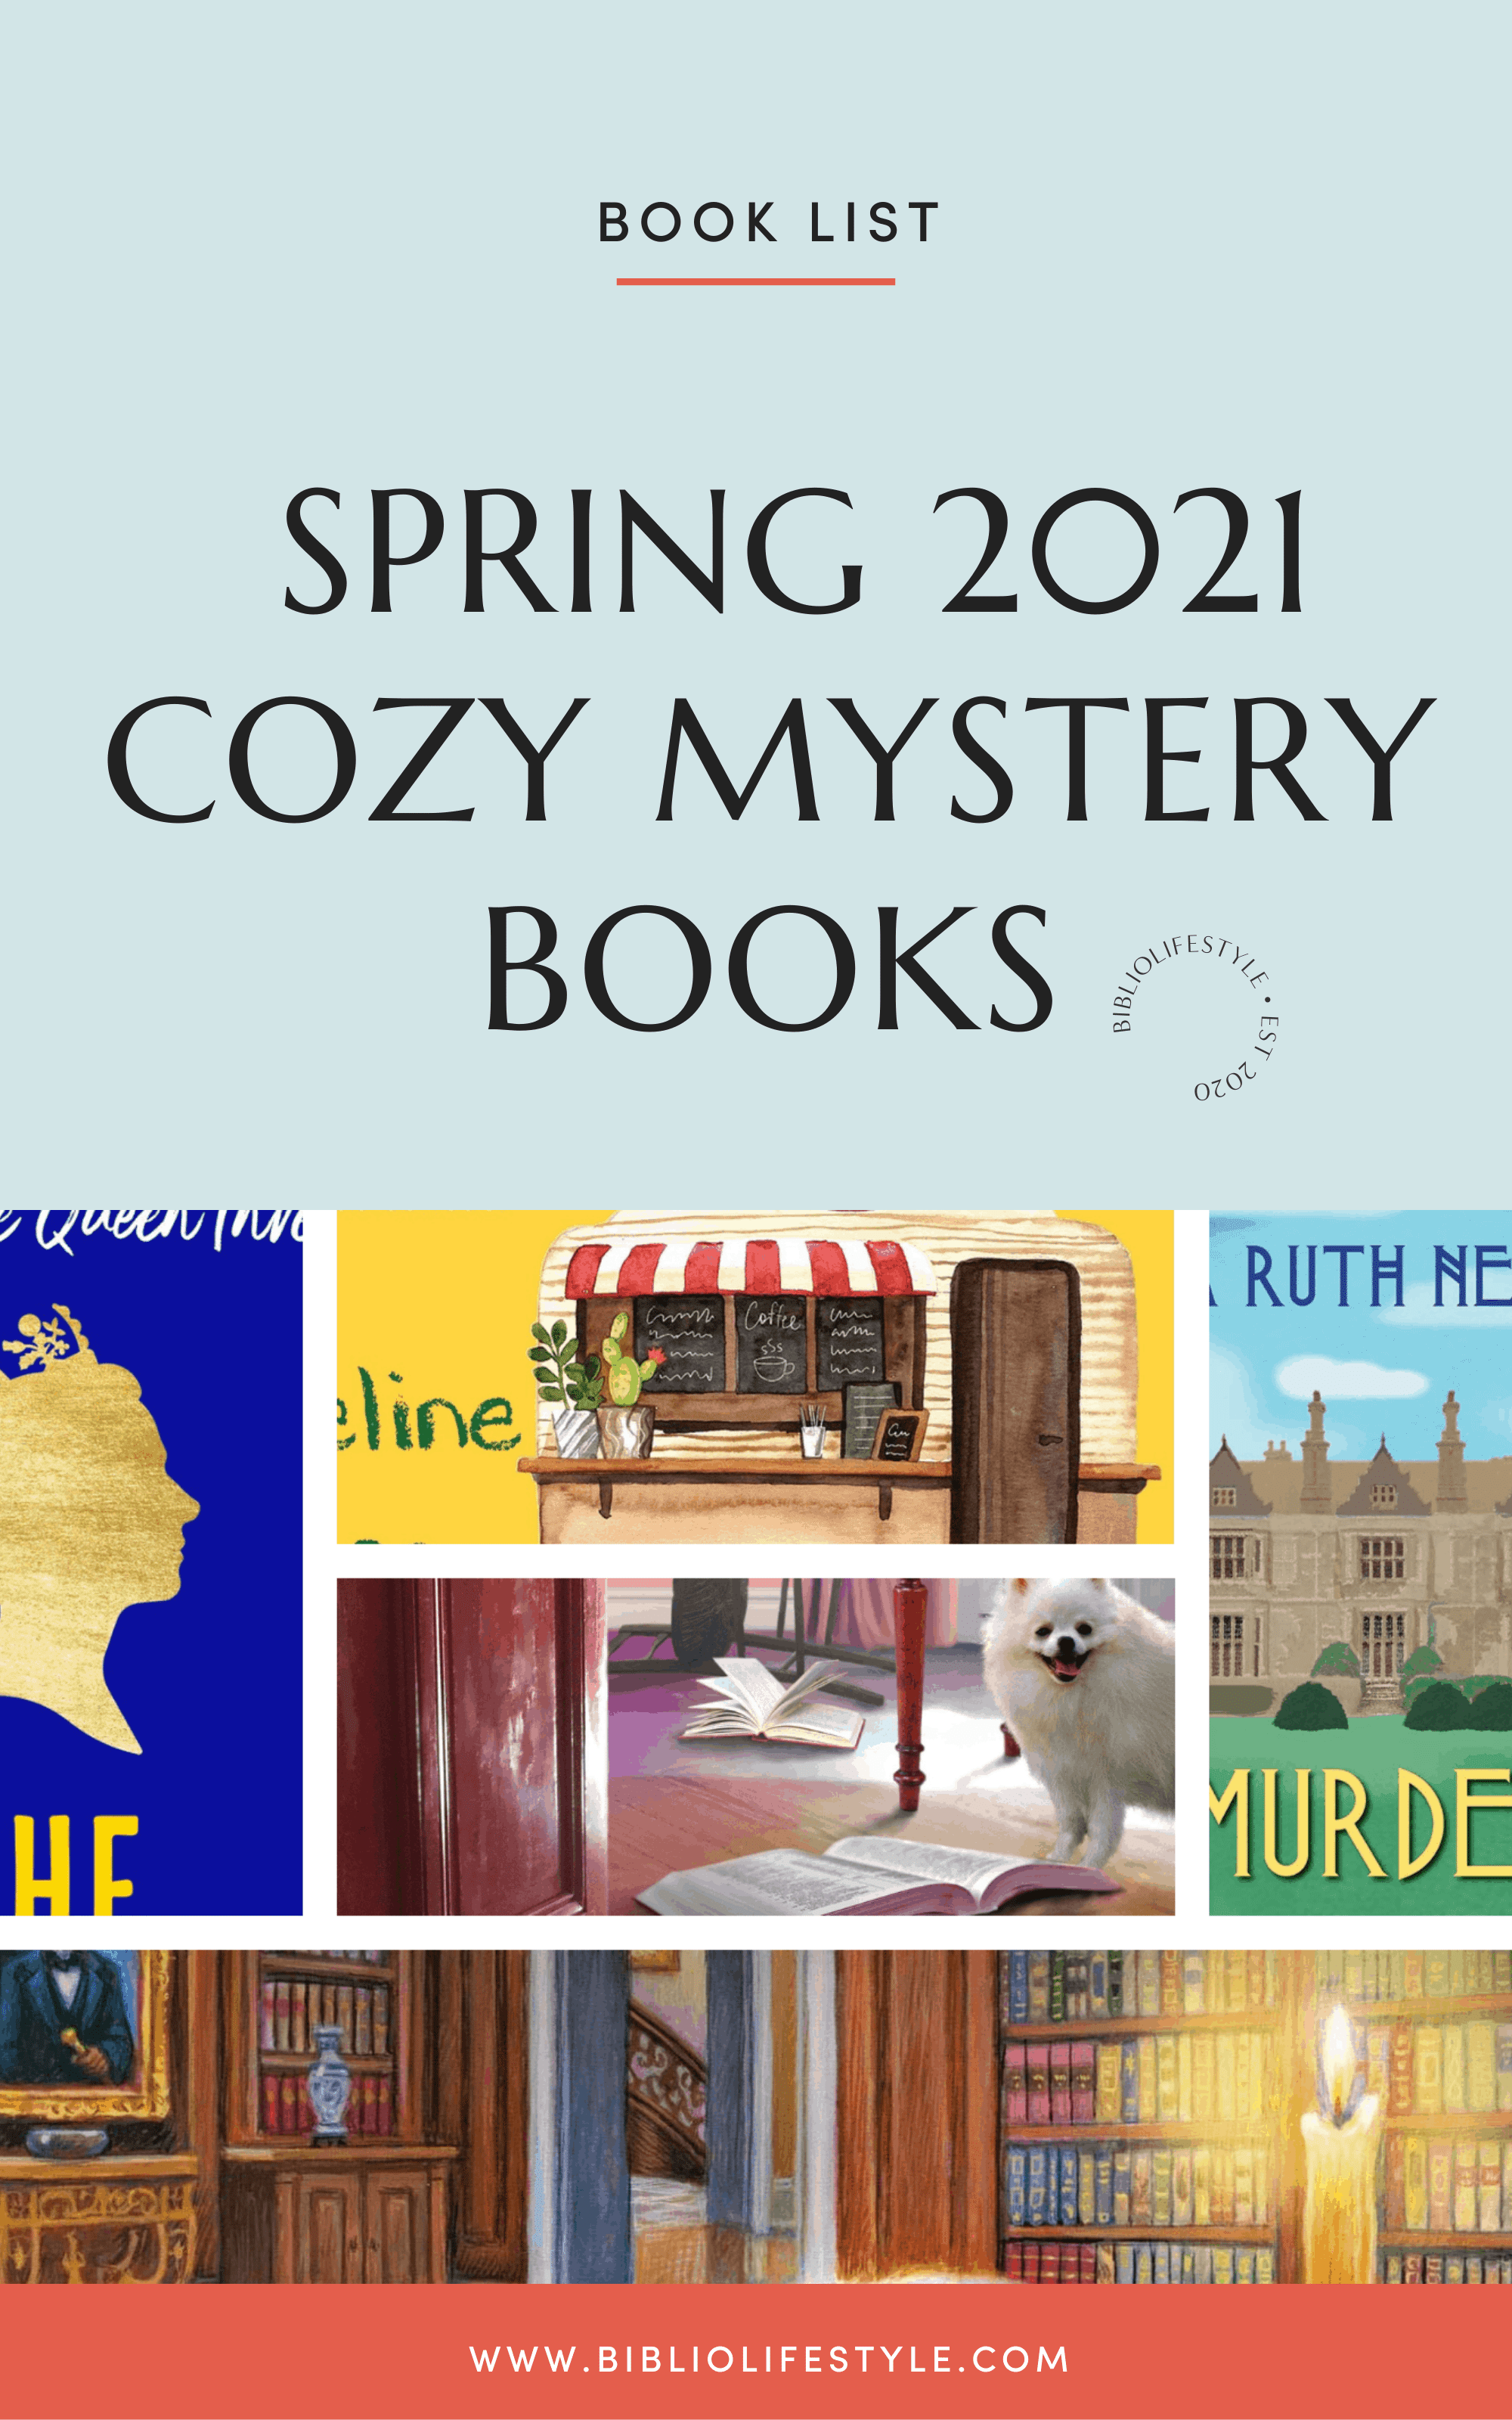 Book List - Cozy Mysteries Books of Spring 2021